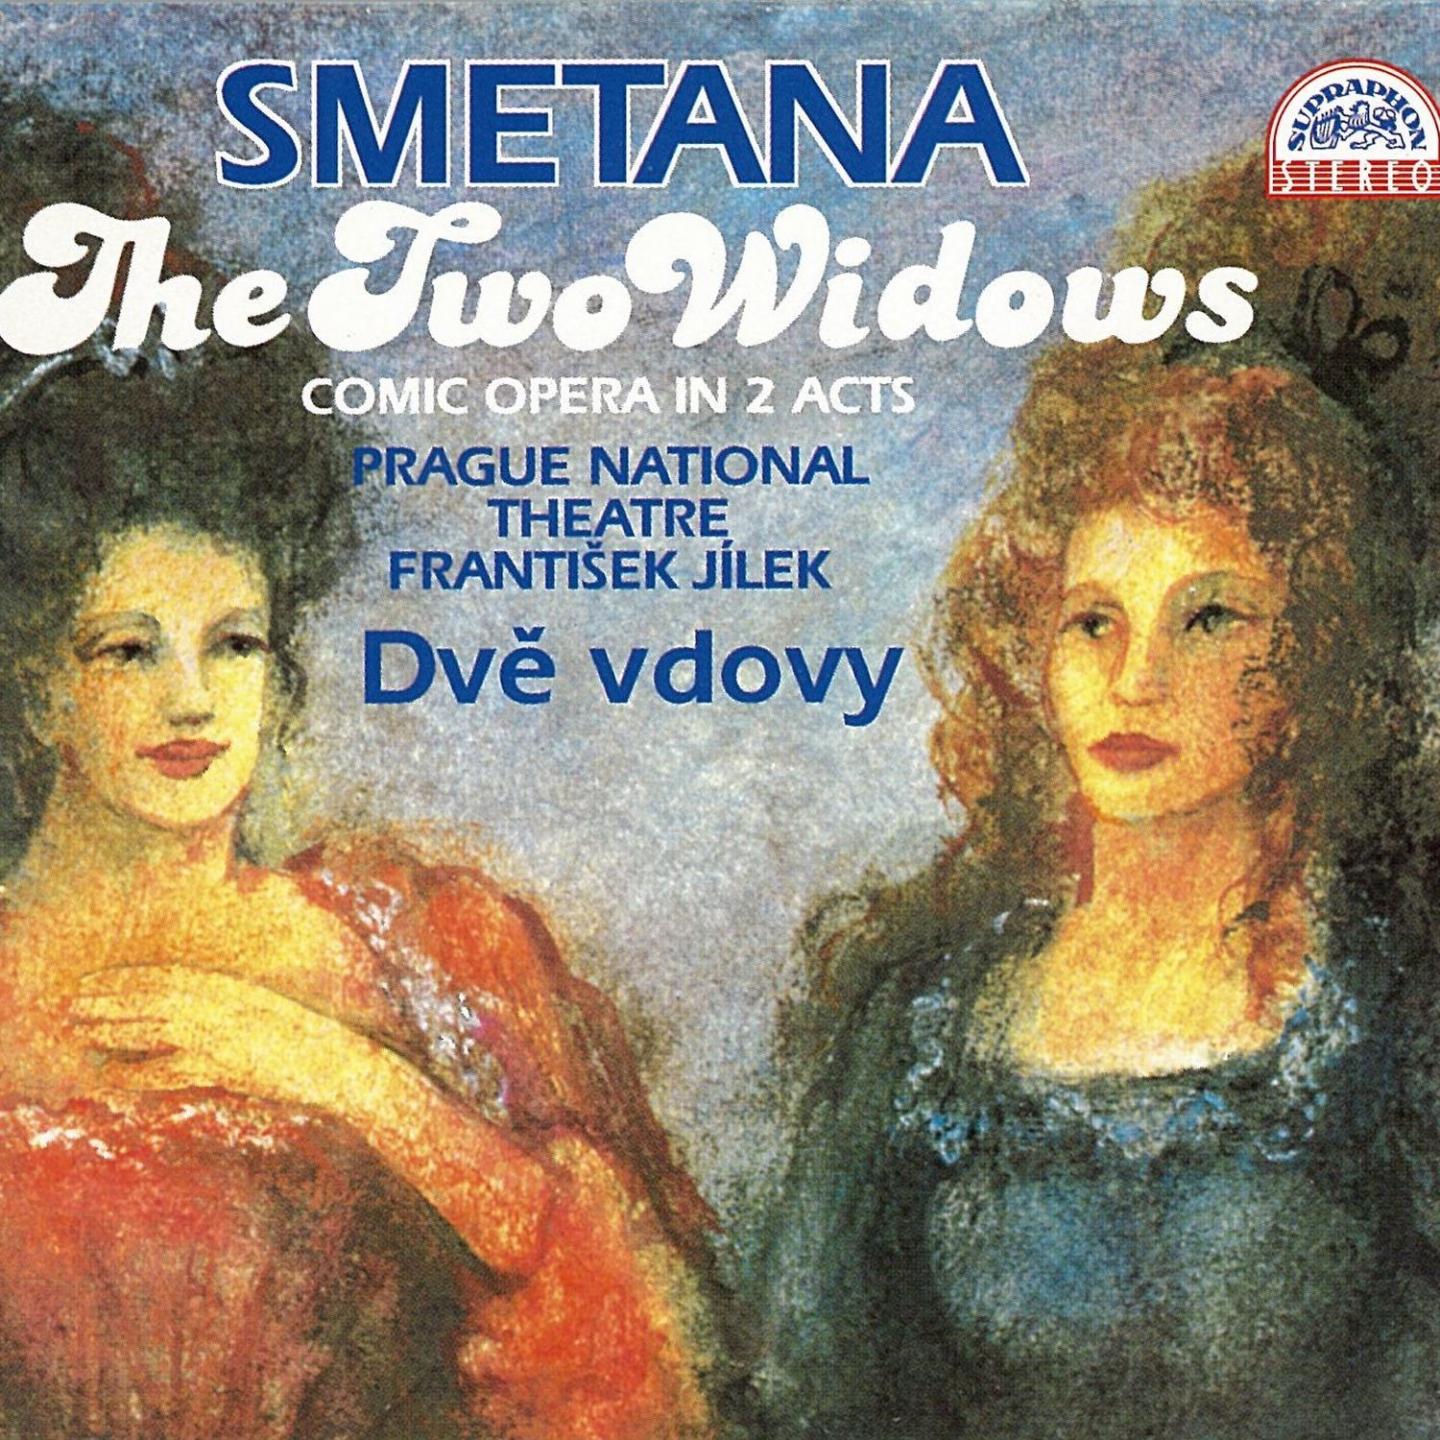 Two Widows, .: "Overture"